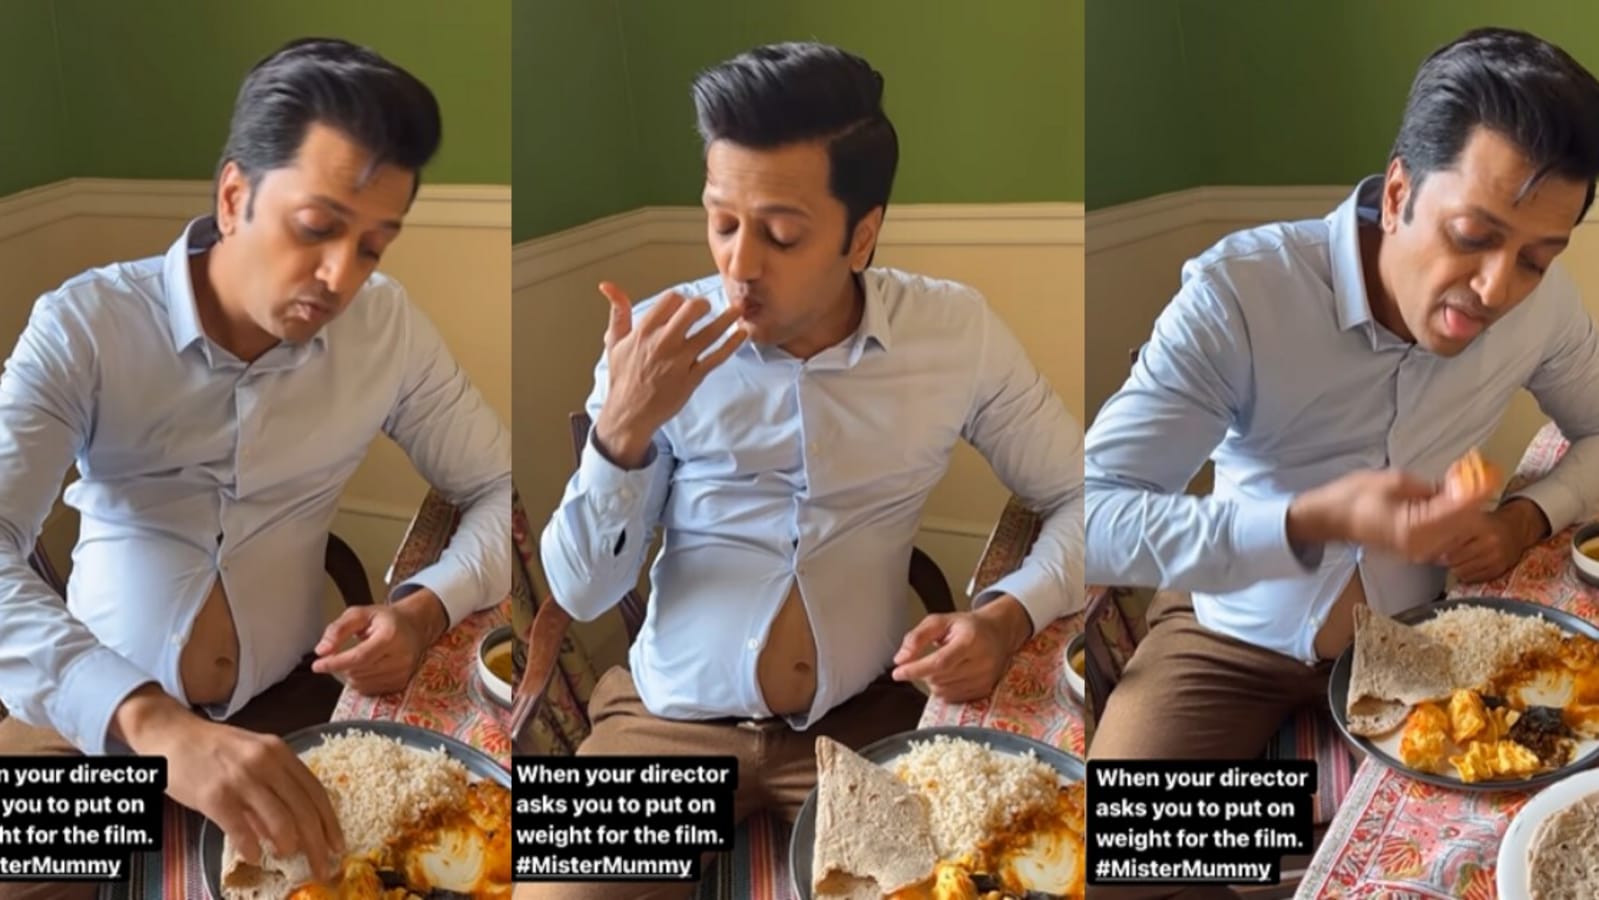 Riteish Deshmukh reveals that he is ‘gaining weight’ as he shares video of himself eating food with his belly out. Watch